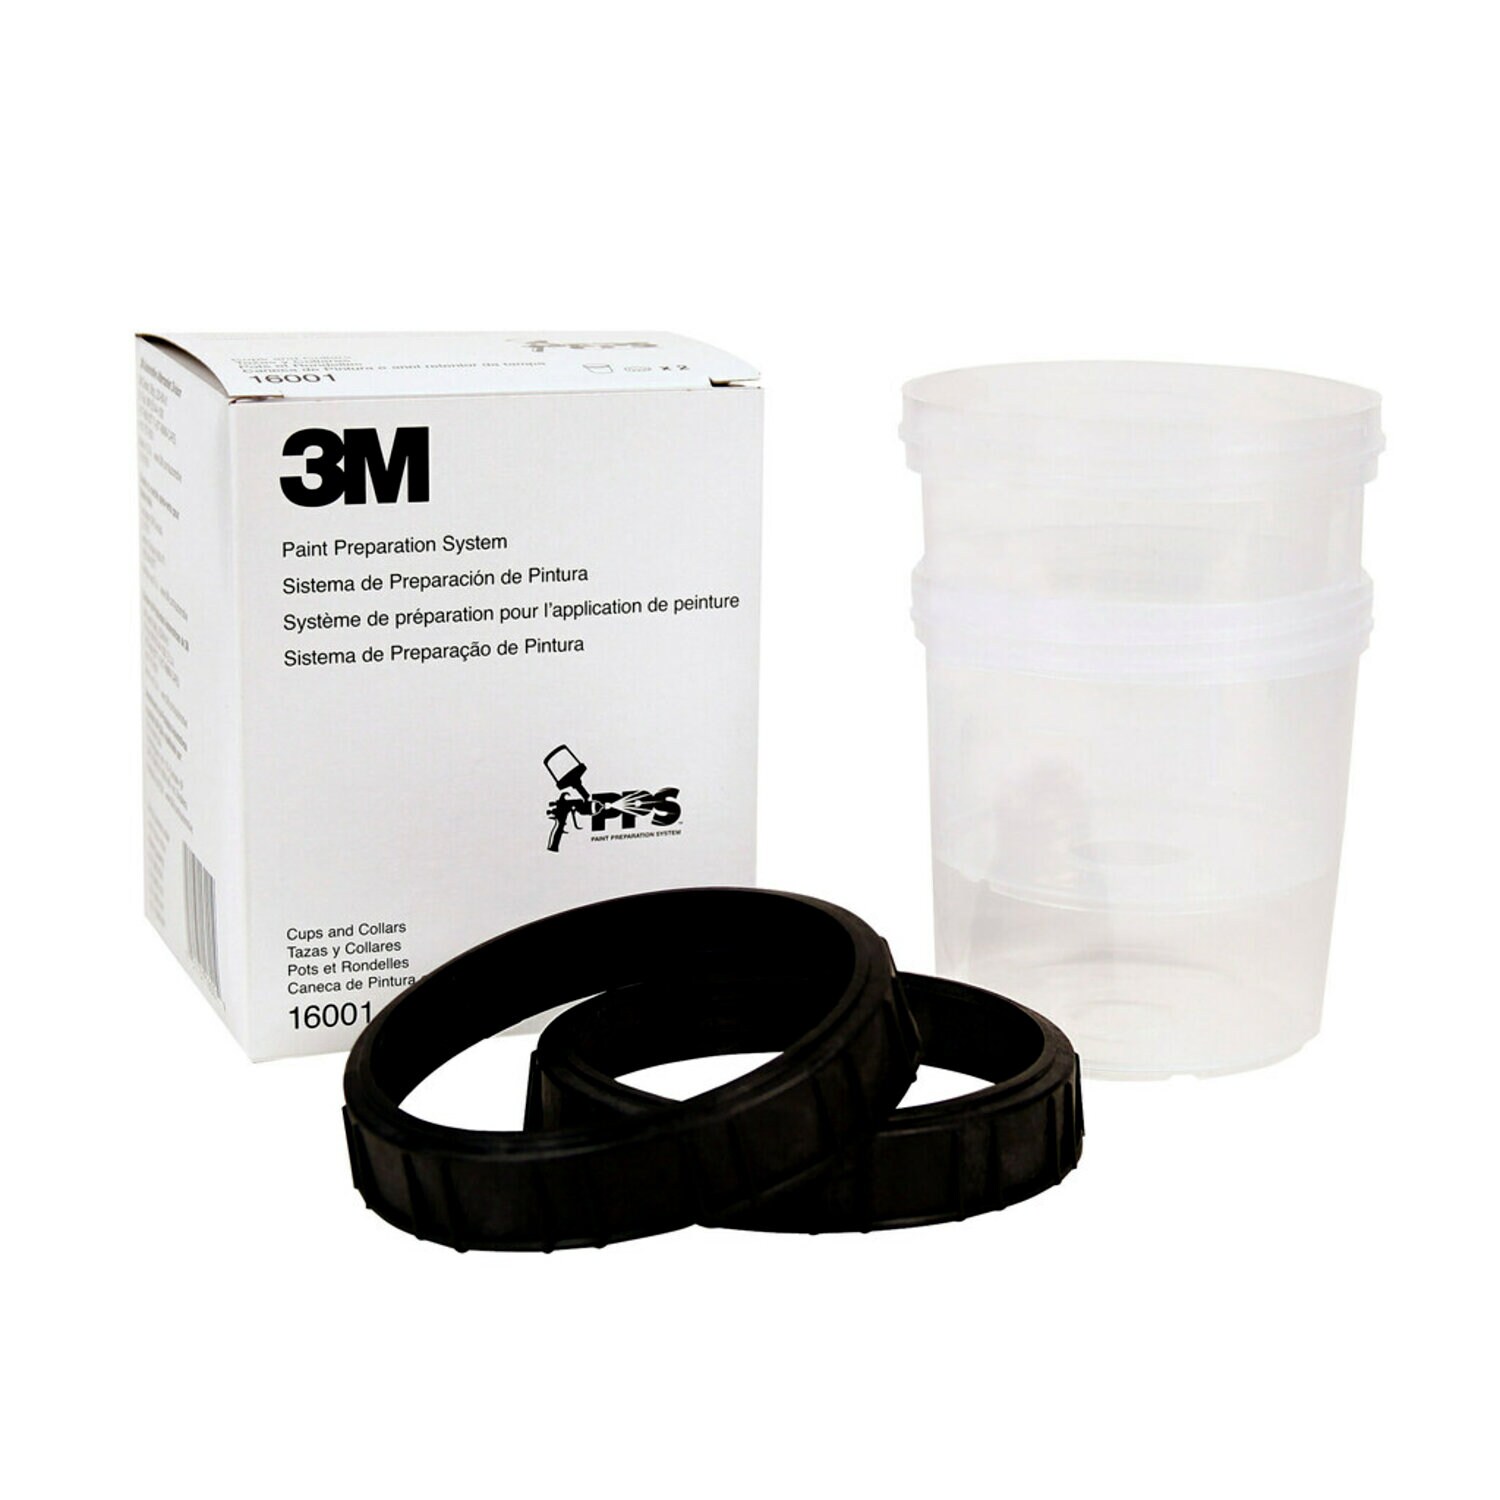 3M 16001 PPS Cup & Collar